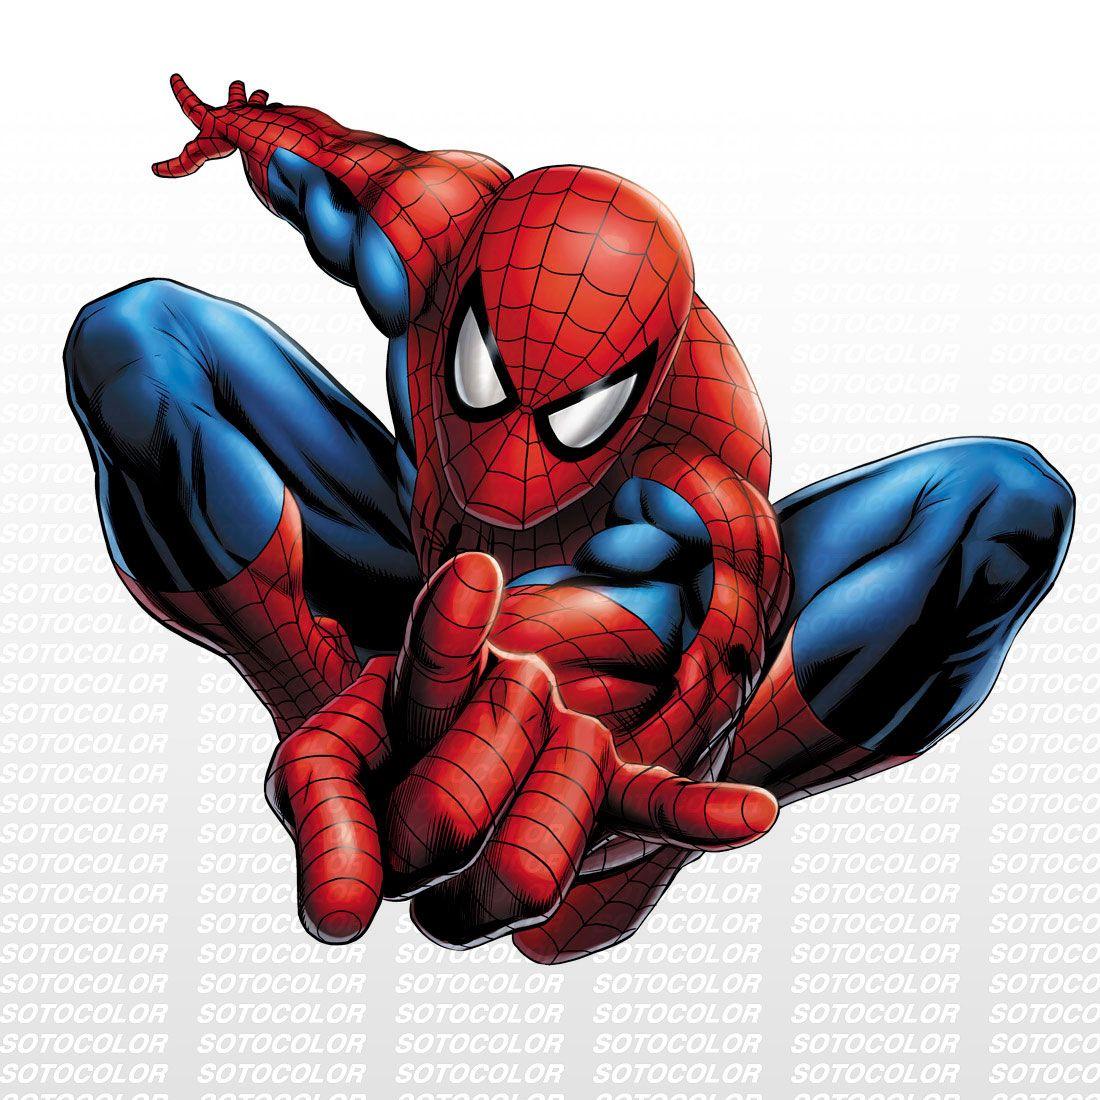 Spiderman a superhero with spider abilities safe the world